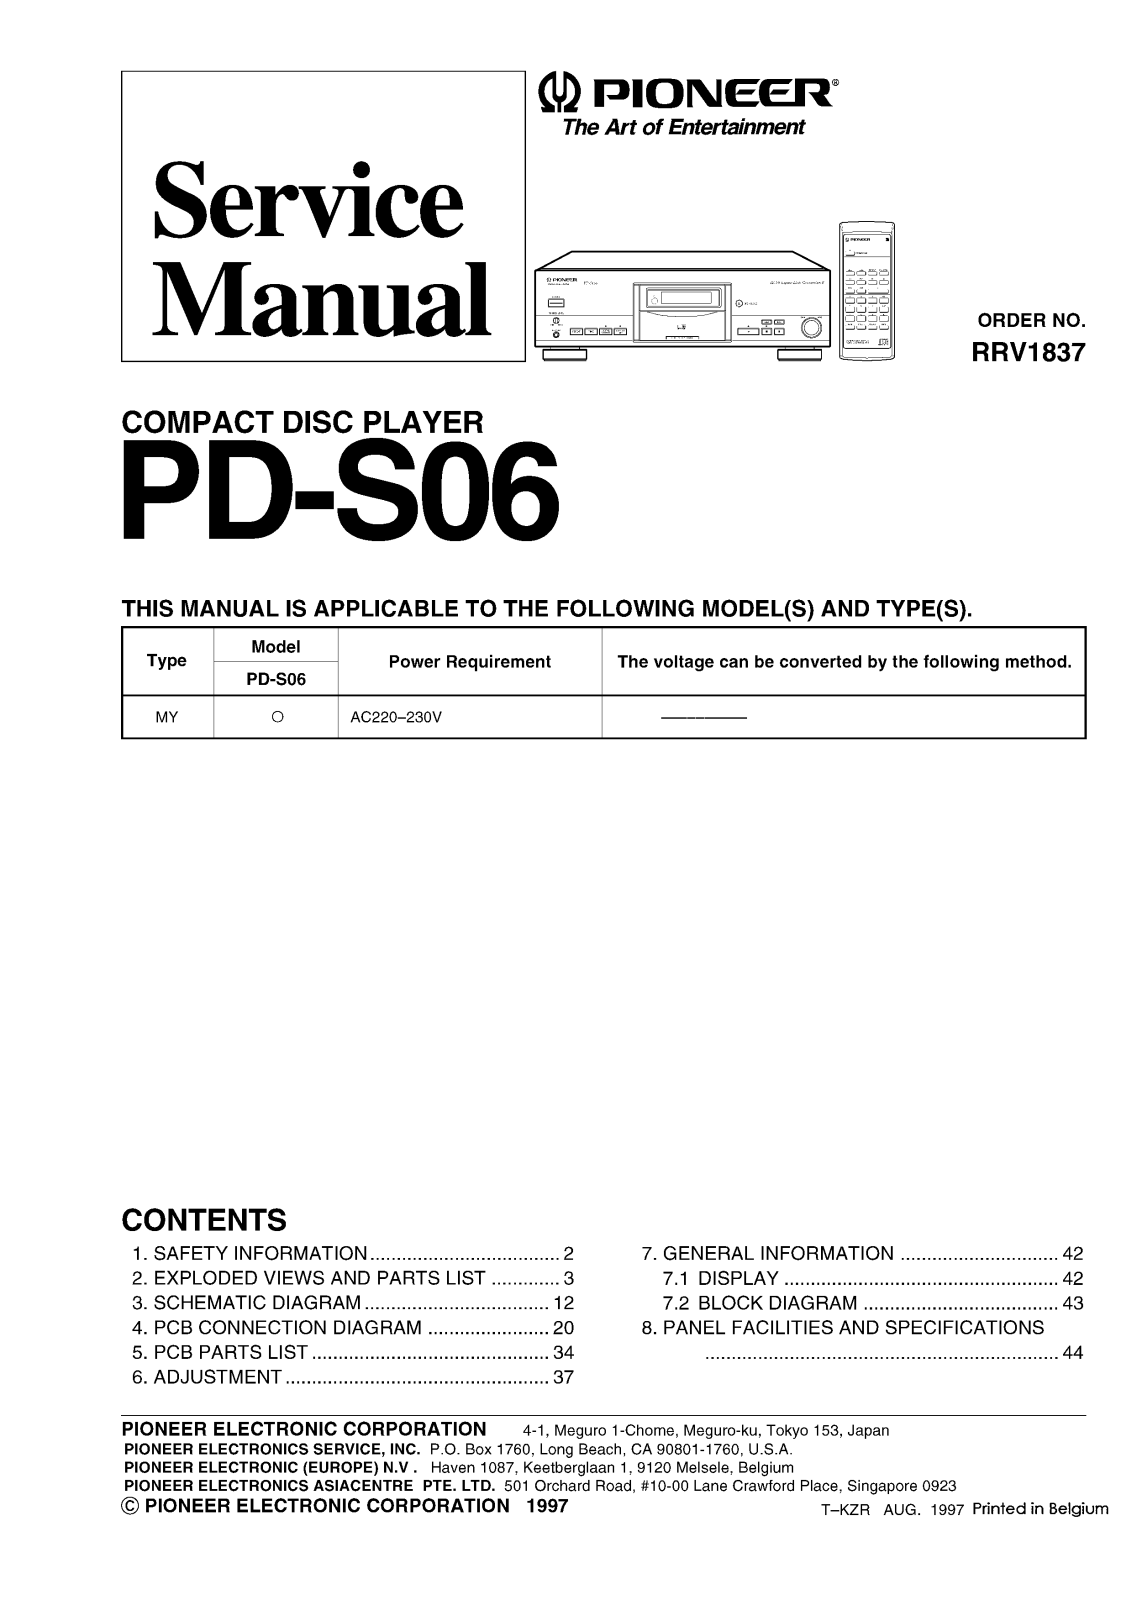 Pioneer PDS-06 Service manual